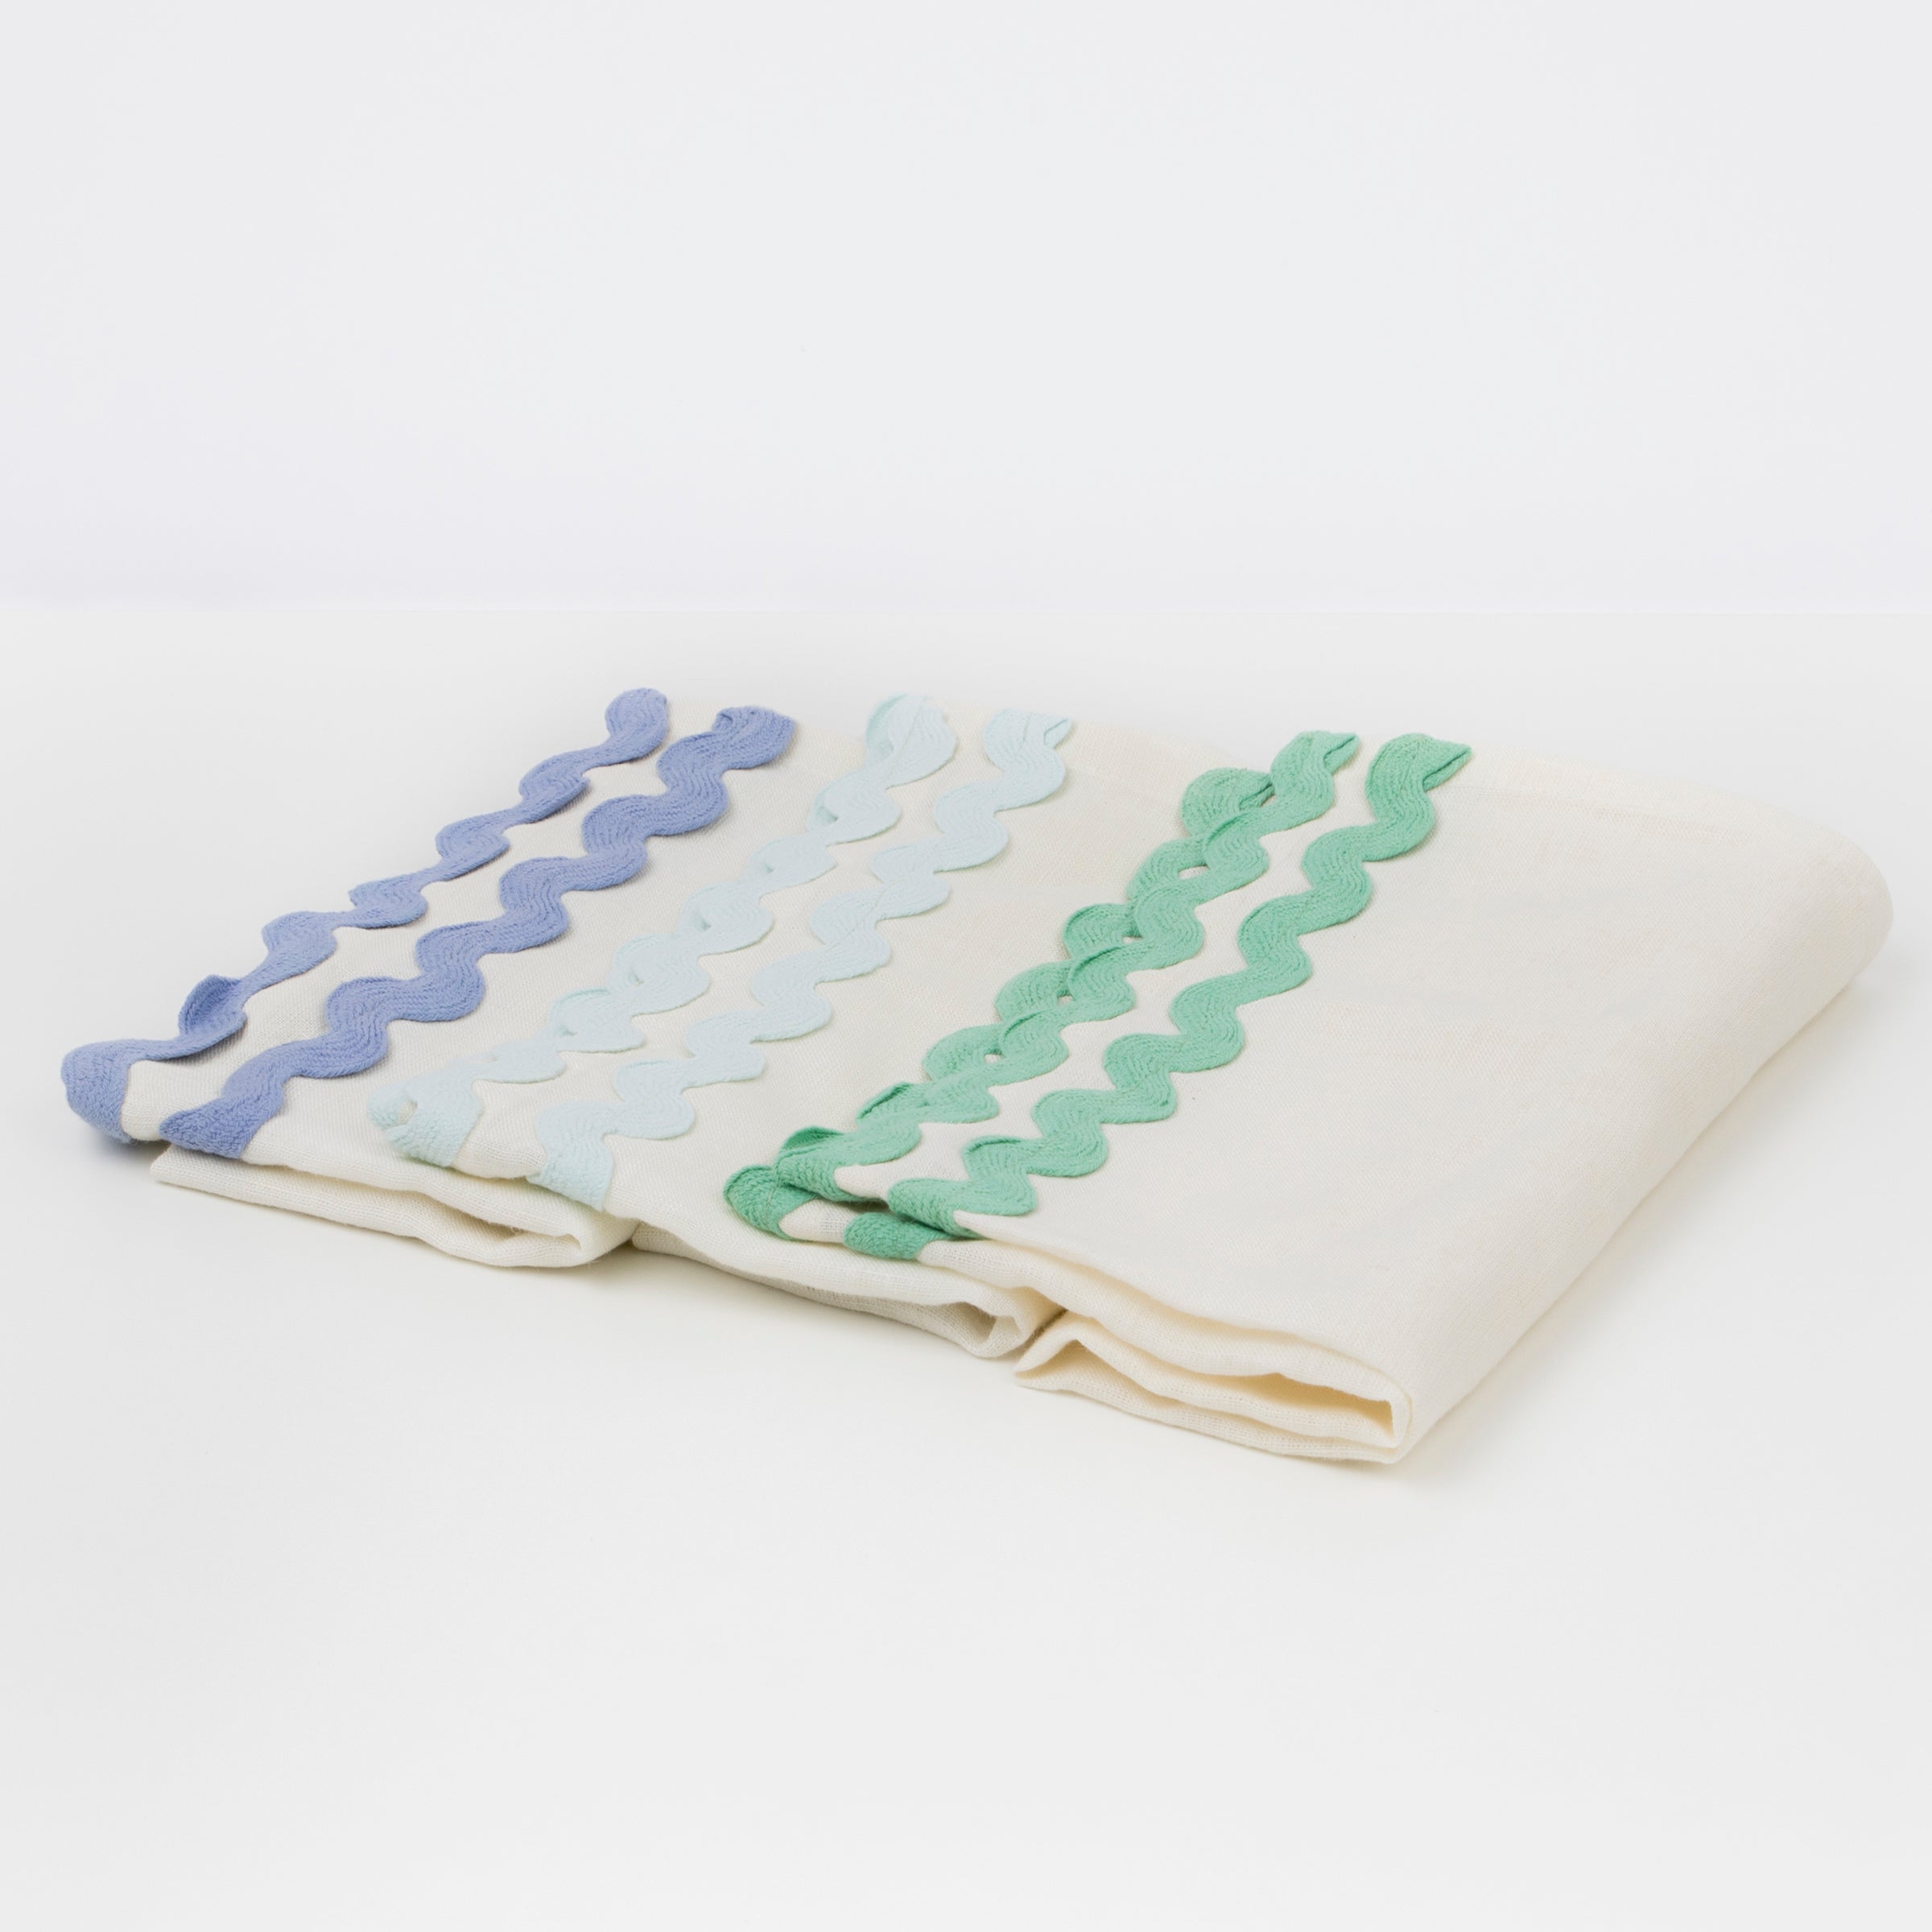 Our linen napkins are designed as reusable napkins, and have ric rac details.